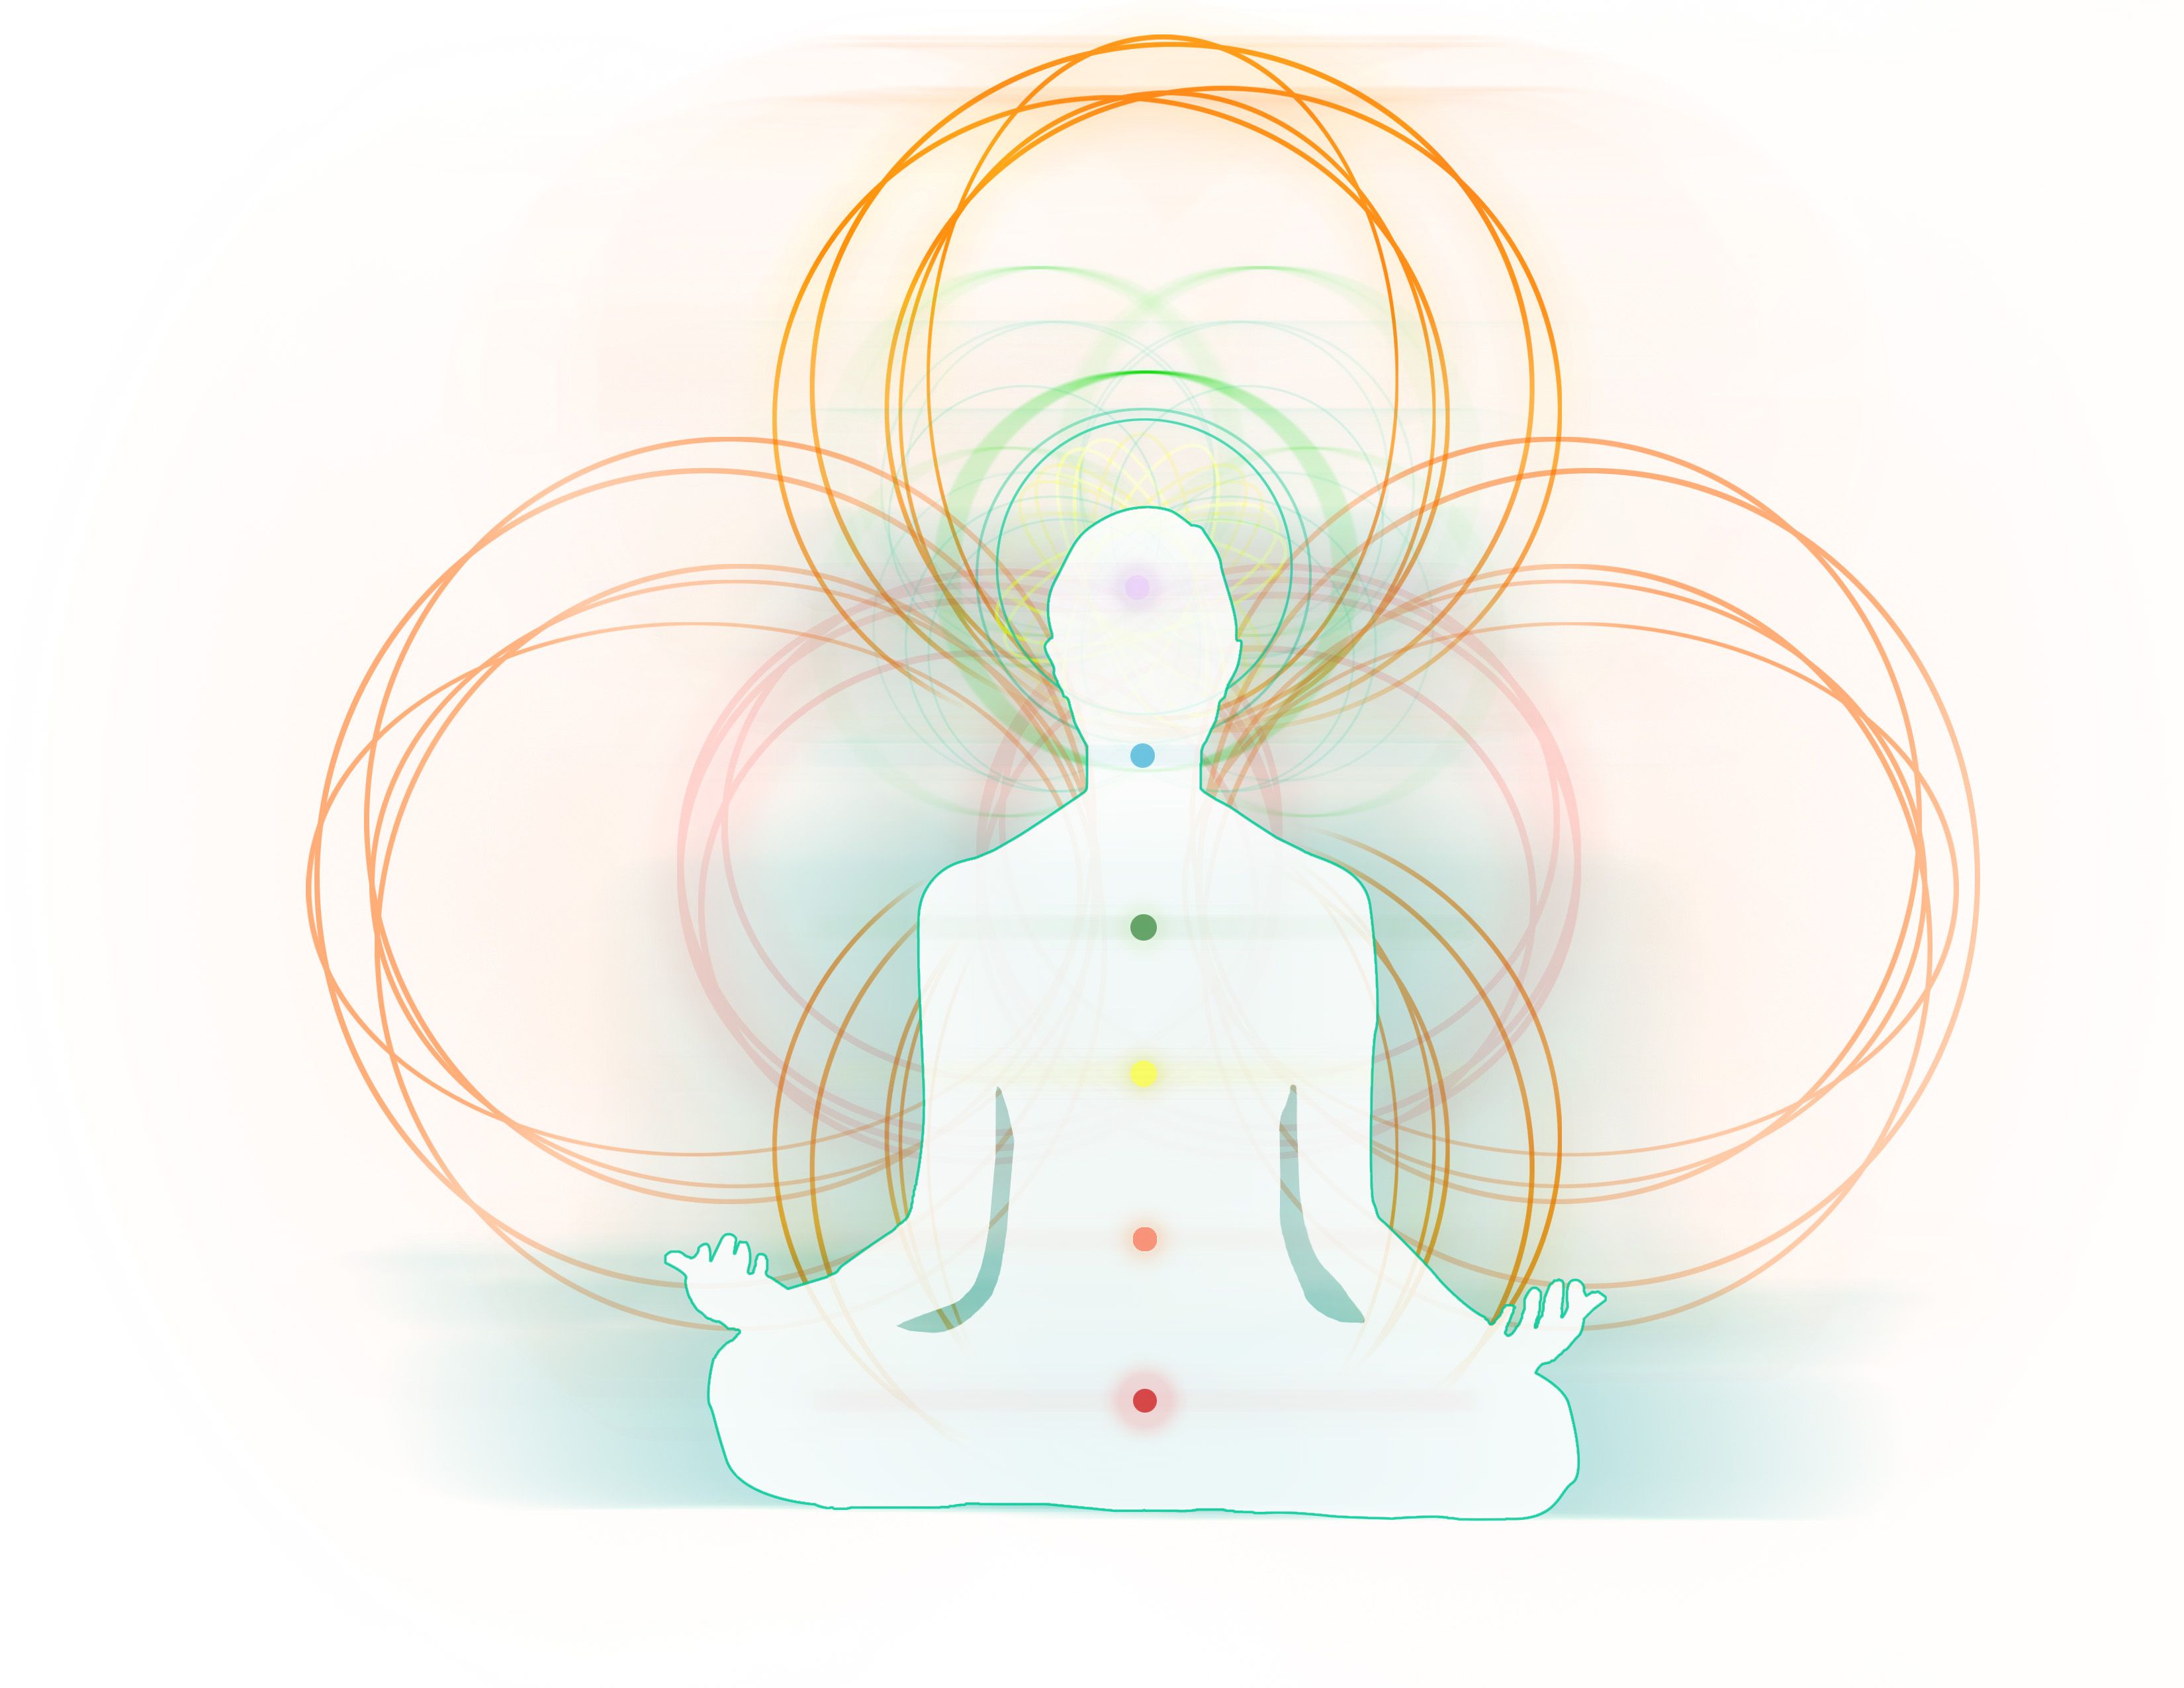 What Are Your Chakras Telling You? York Spirit